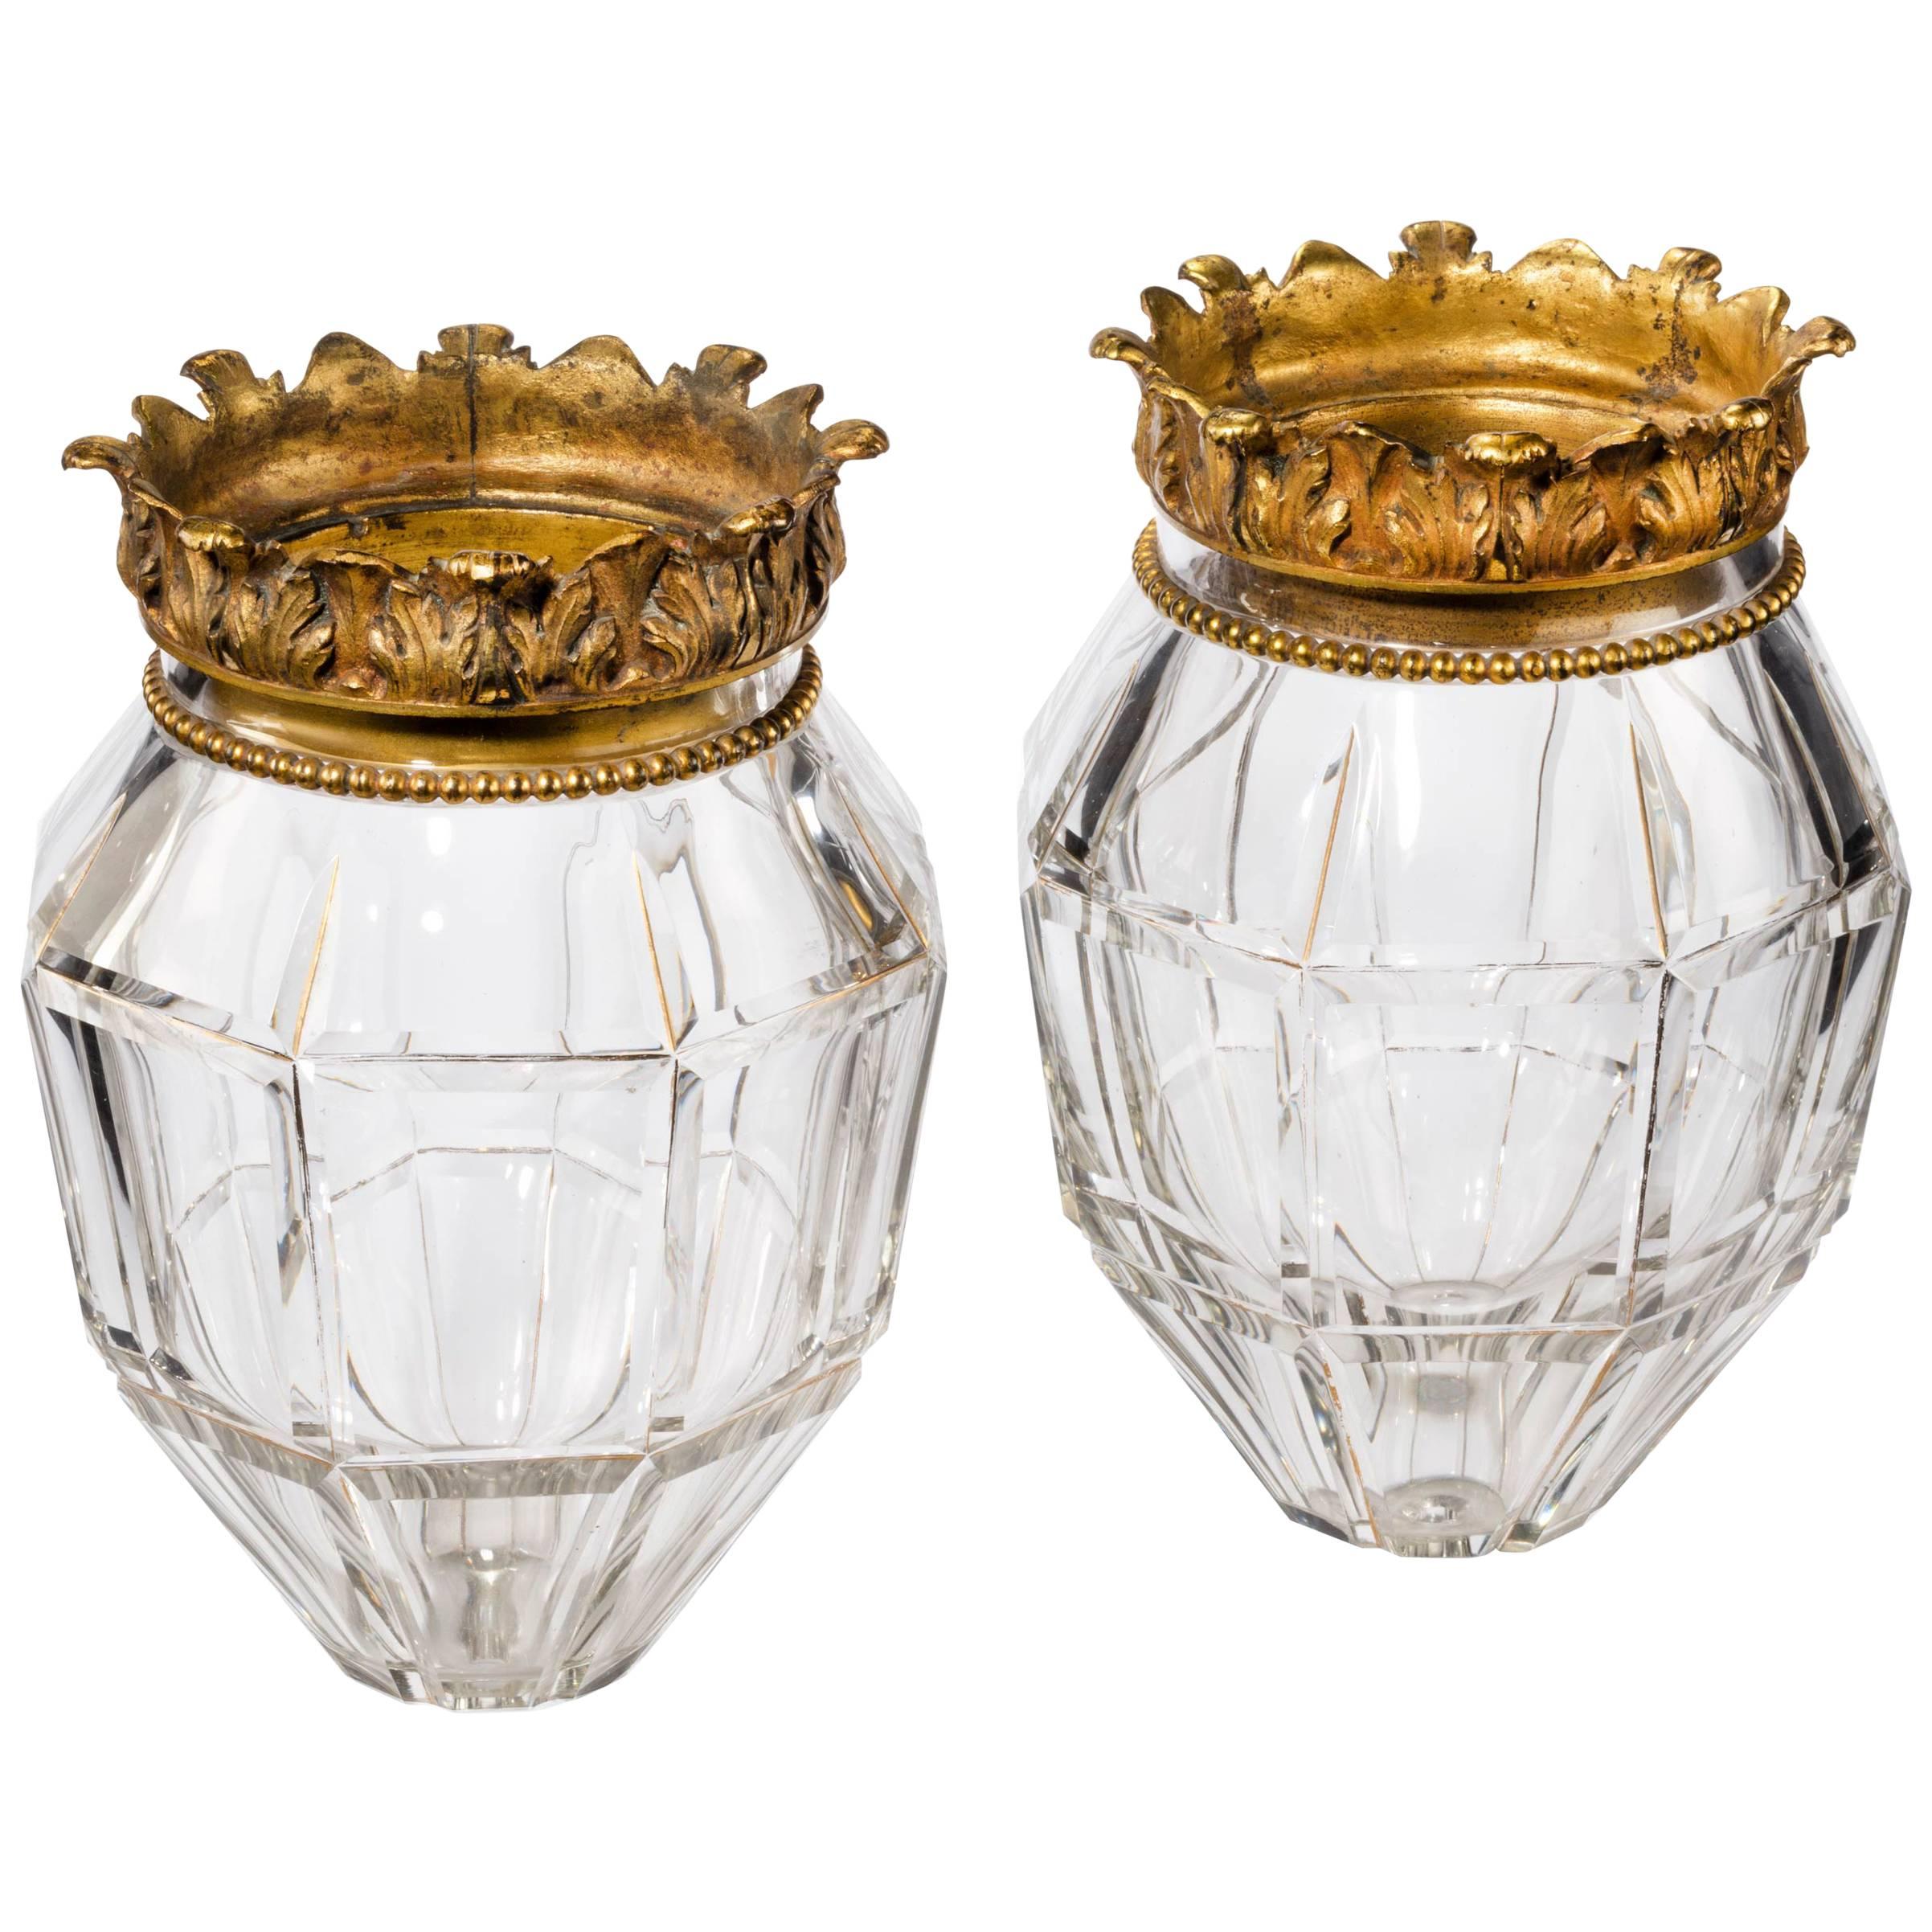 Pair of Early 20th Century Vase Lanterns with Bevelled Edges